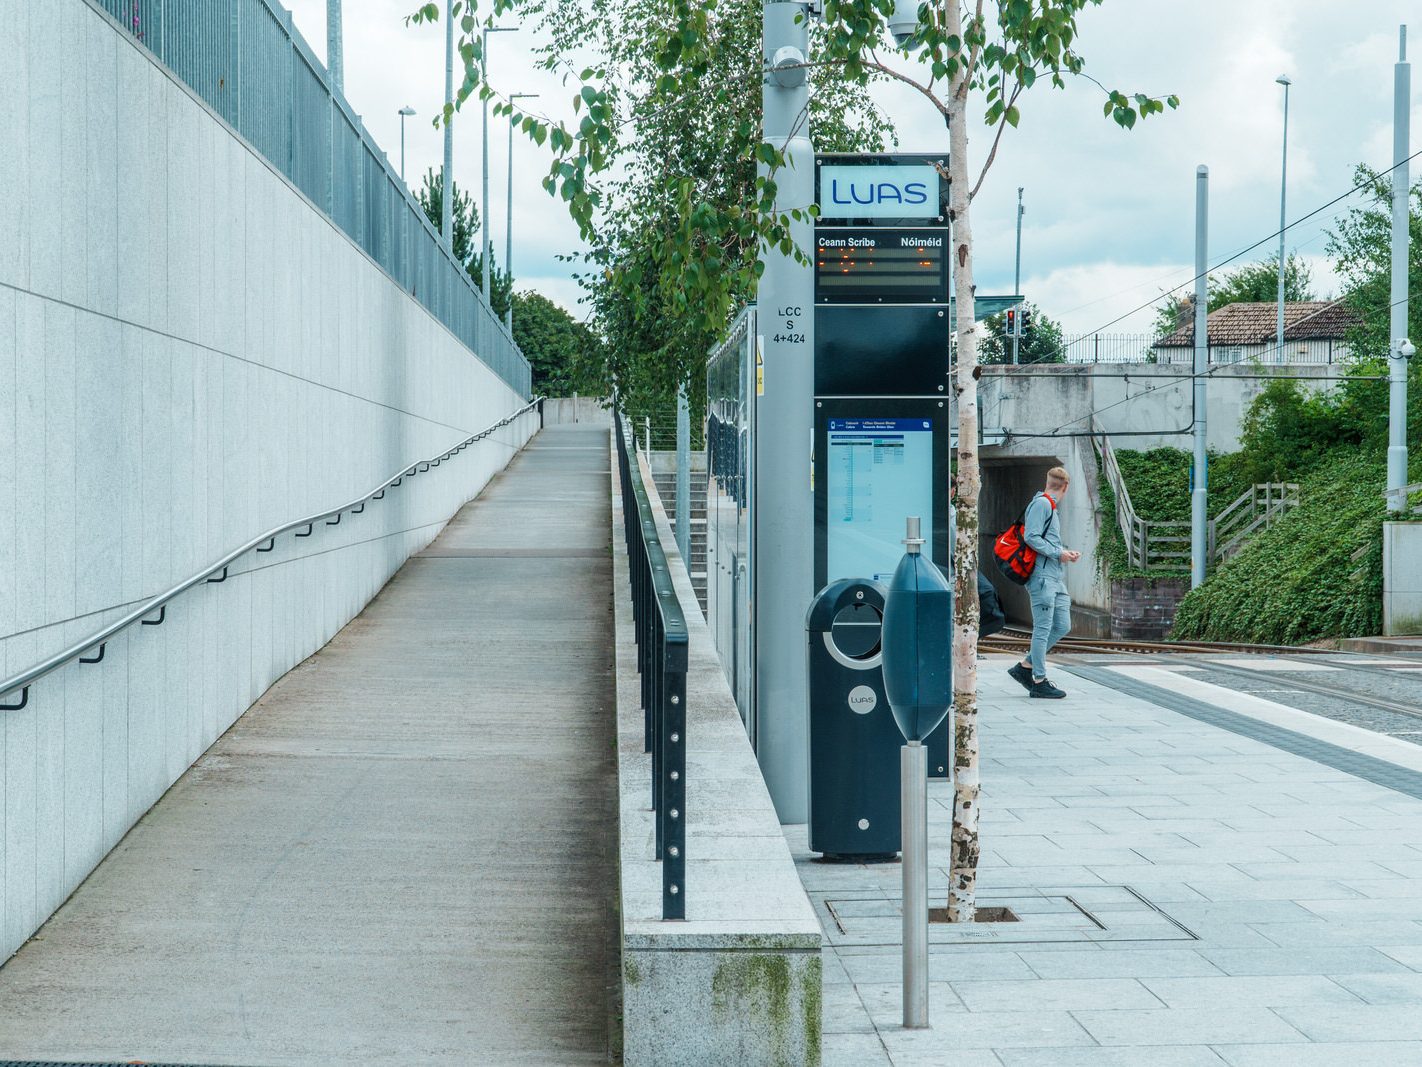 CABRA LUAS TRAM STOP ON CONNAUGHT STREET [GOOGLE BARD INCORRECTLY CLAIMED THAT THERE IS A PUBLIC TOILET AND A TICKET OFFICE] 021